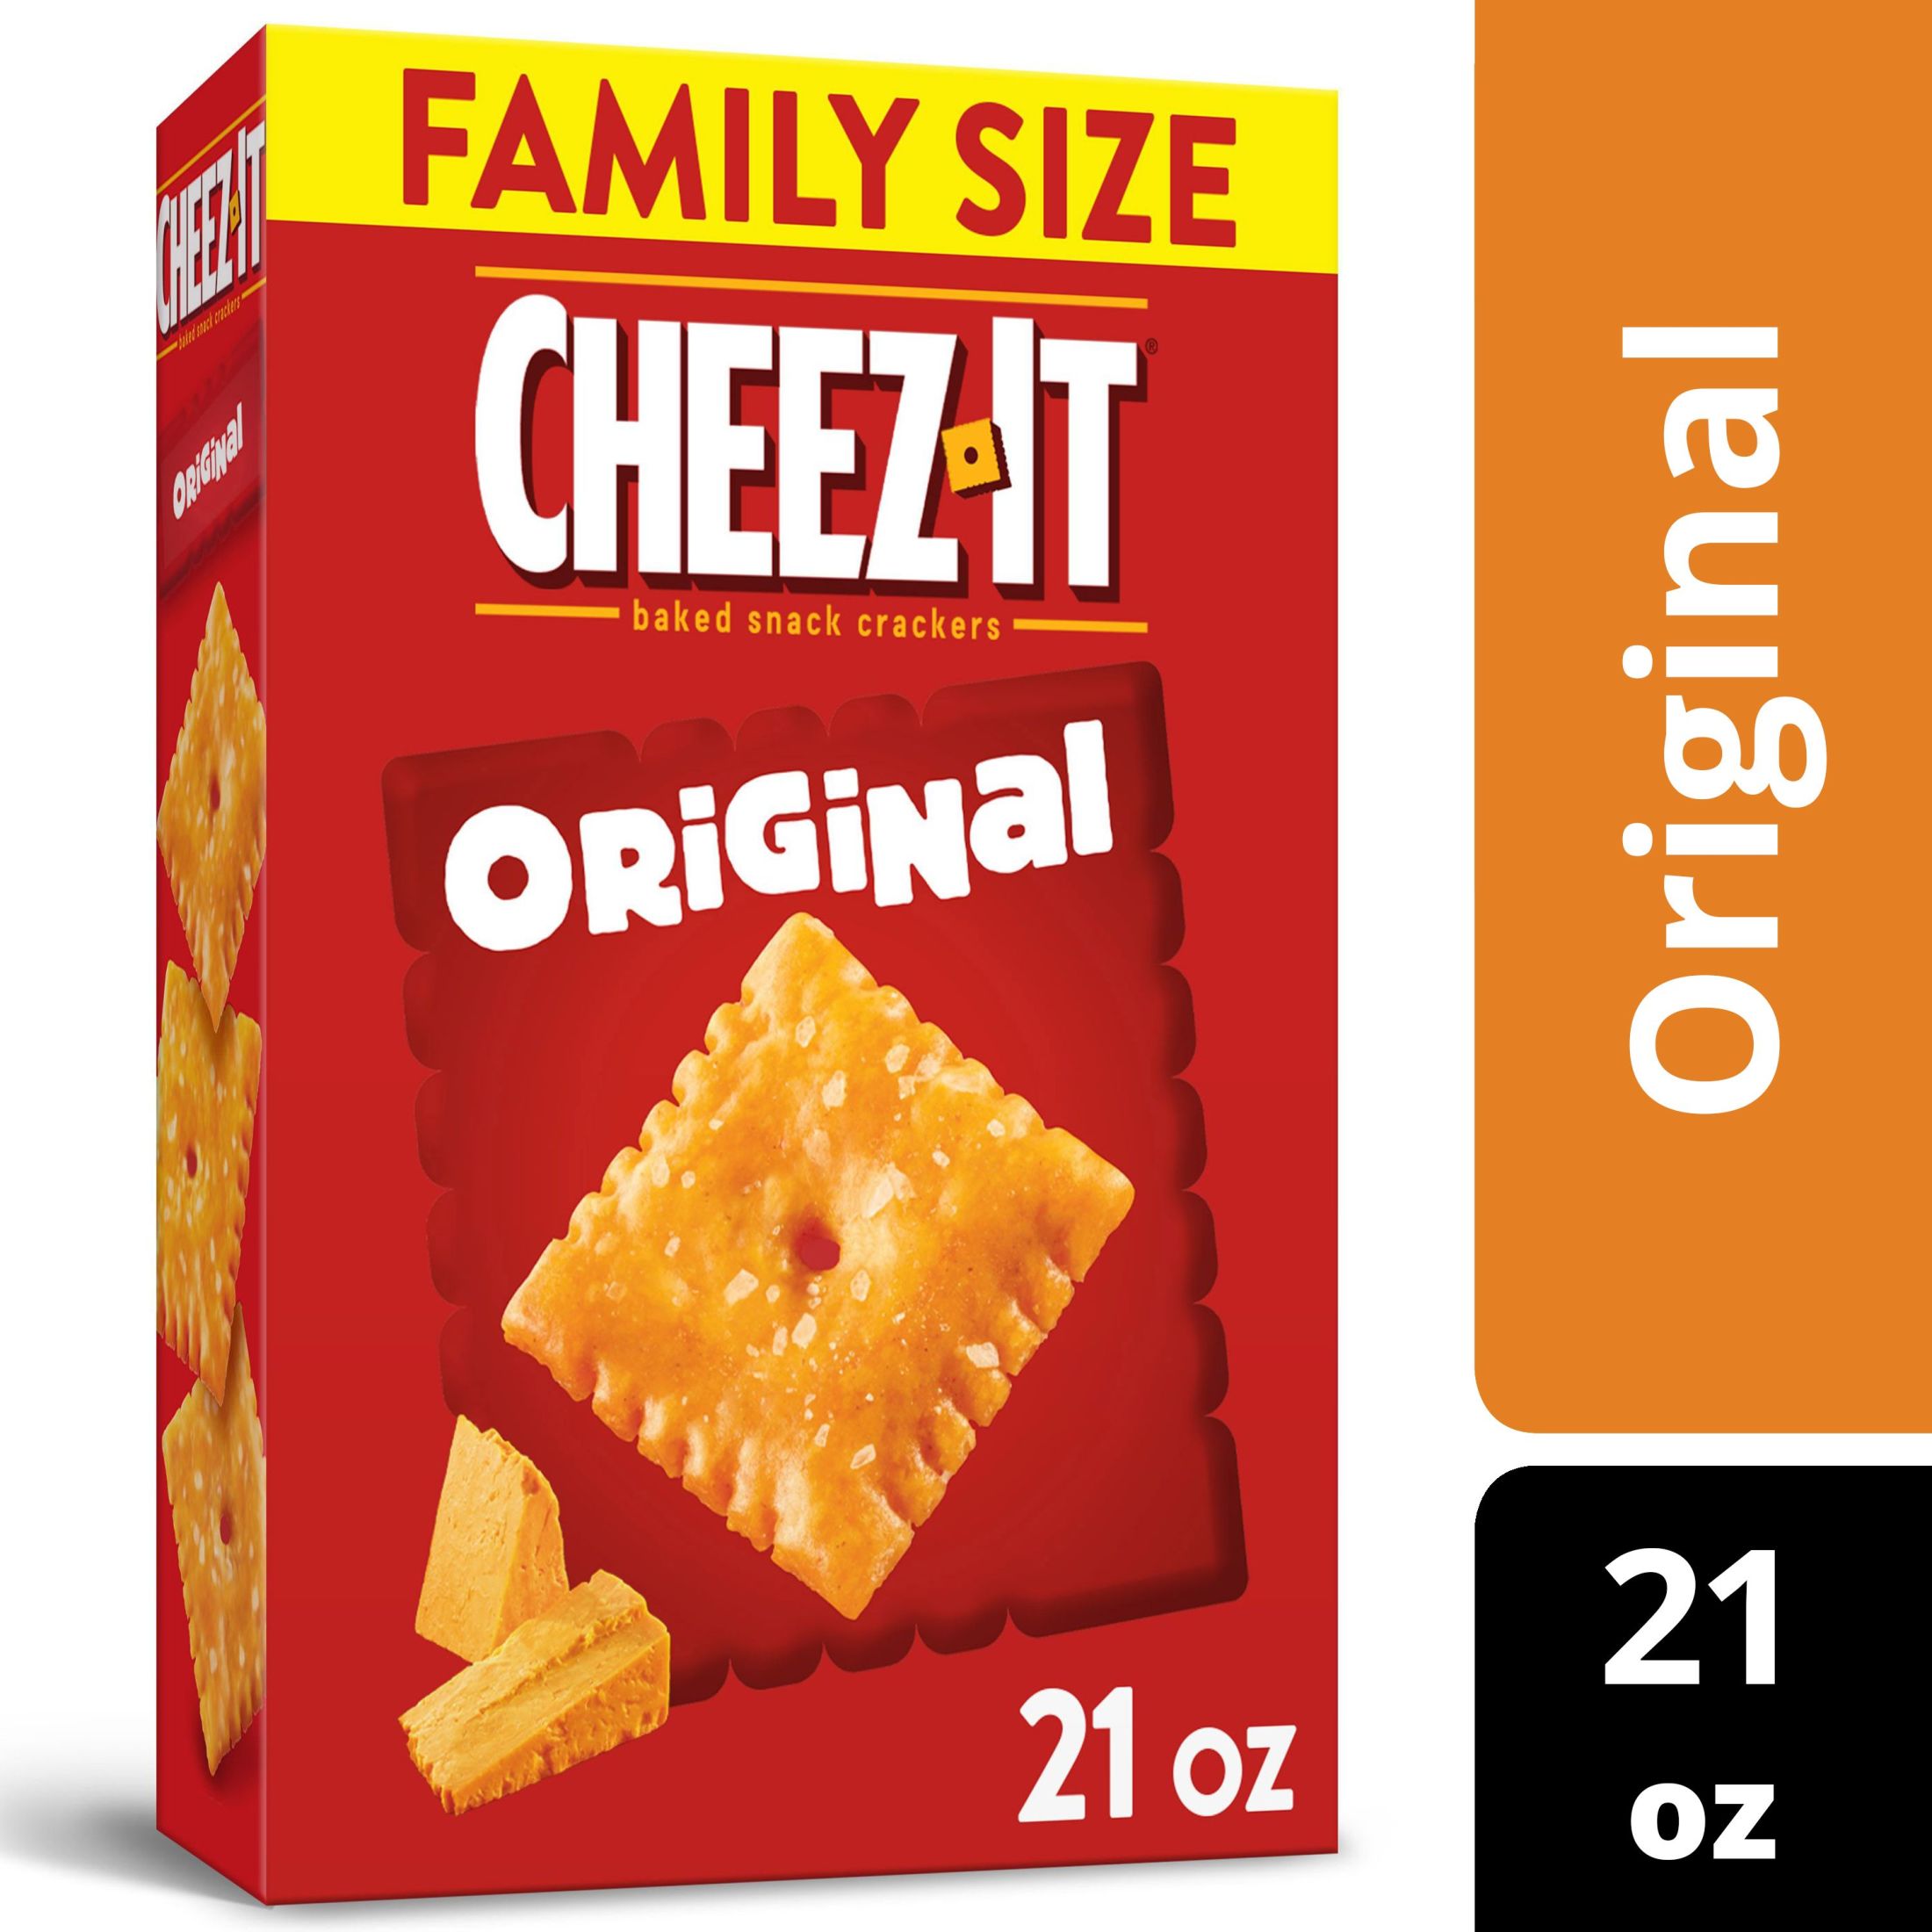 Cheez-It Original Cheese Crackers, Baked Snack Crackers, 21 oz - image 1 of 12